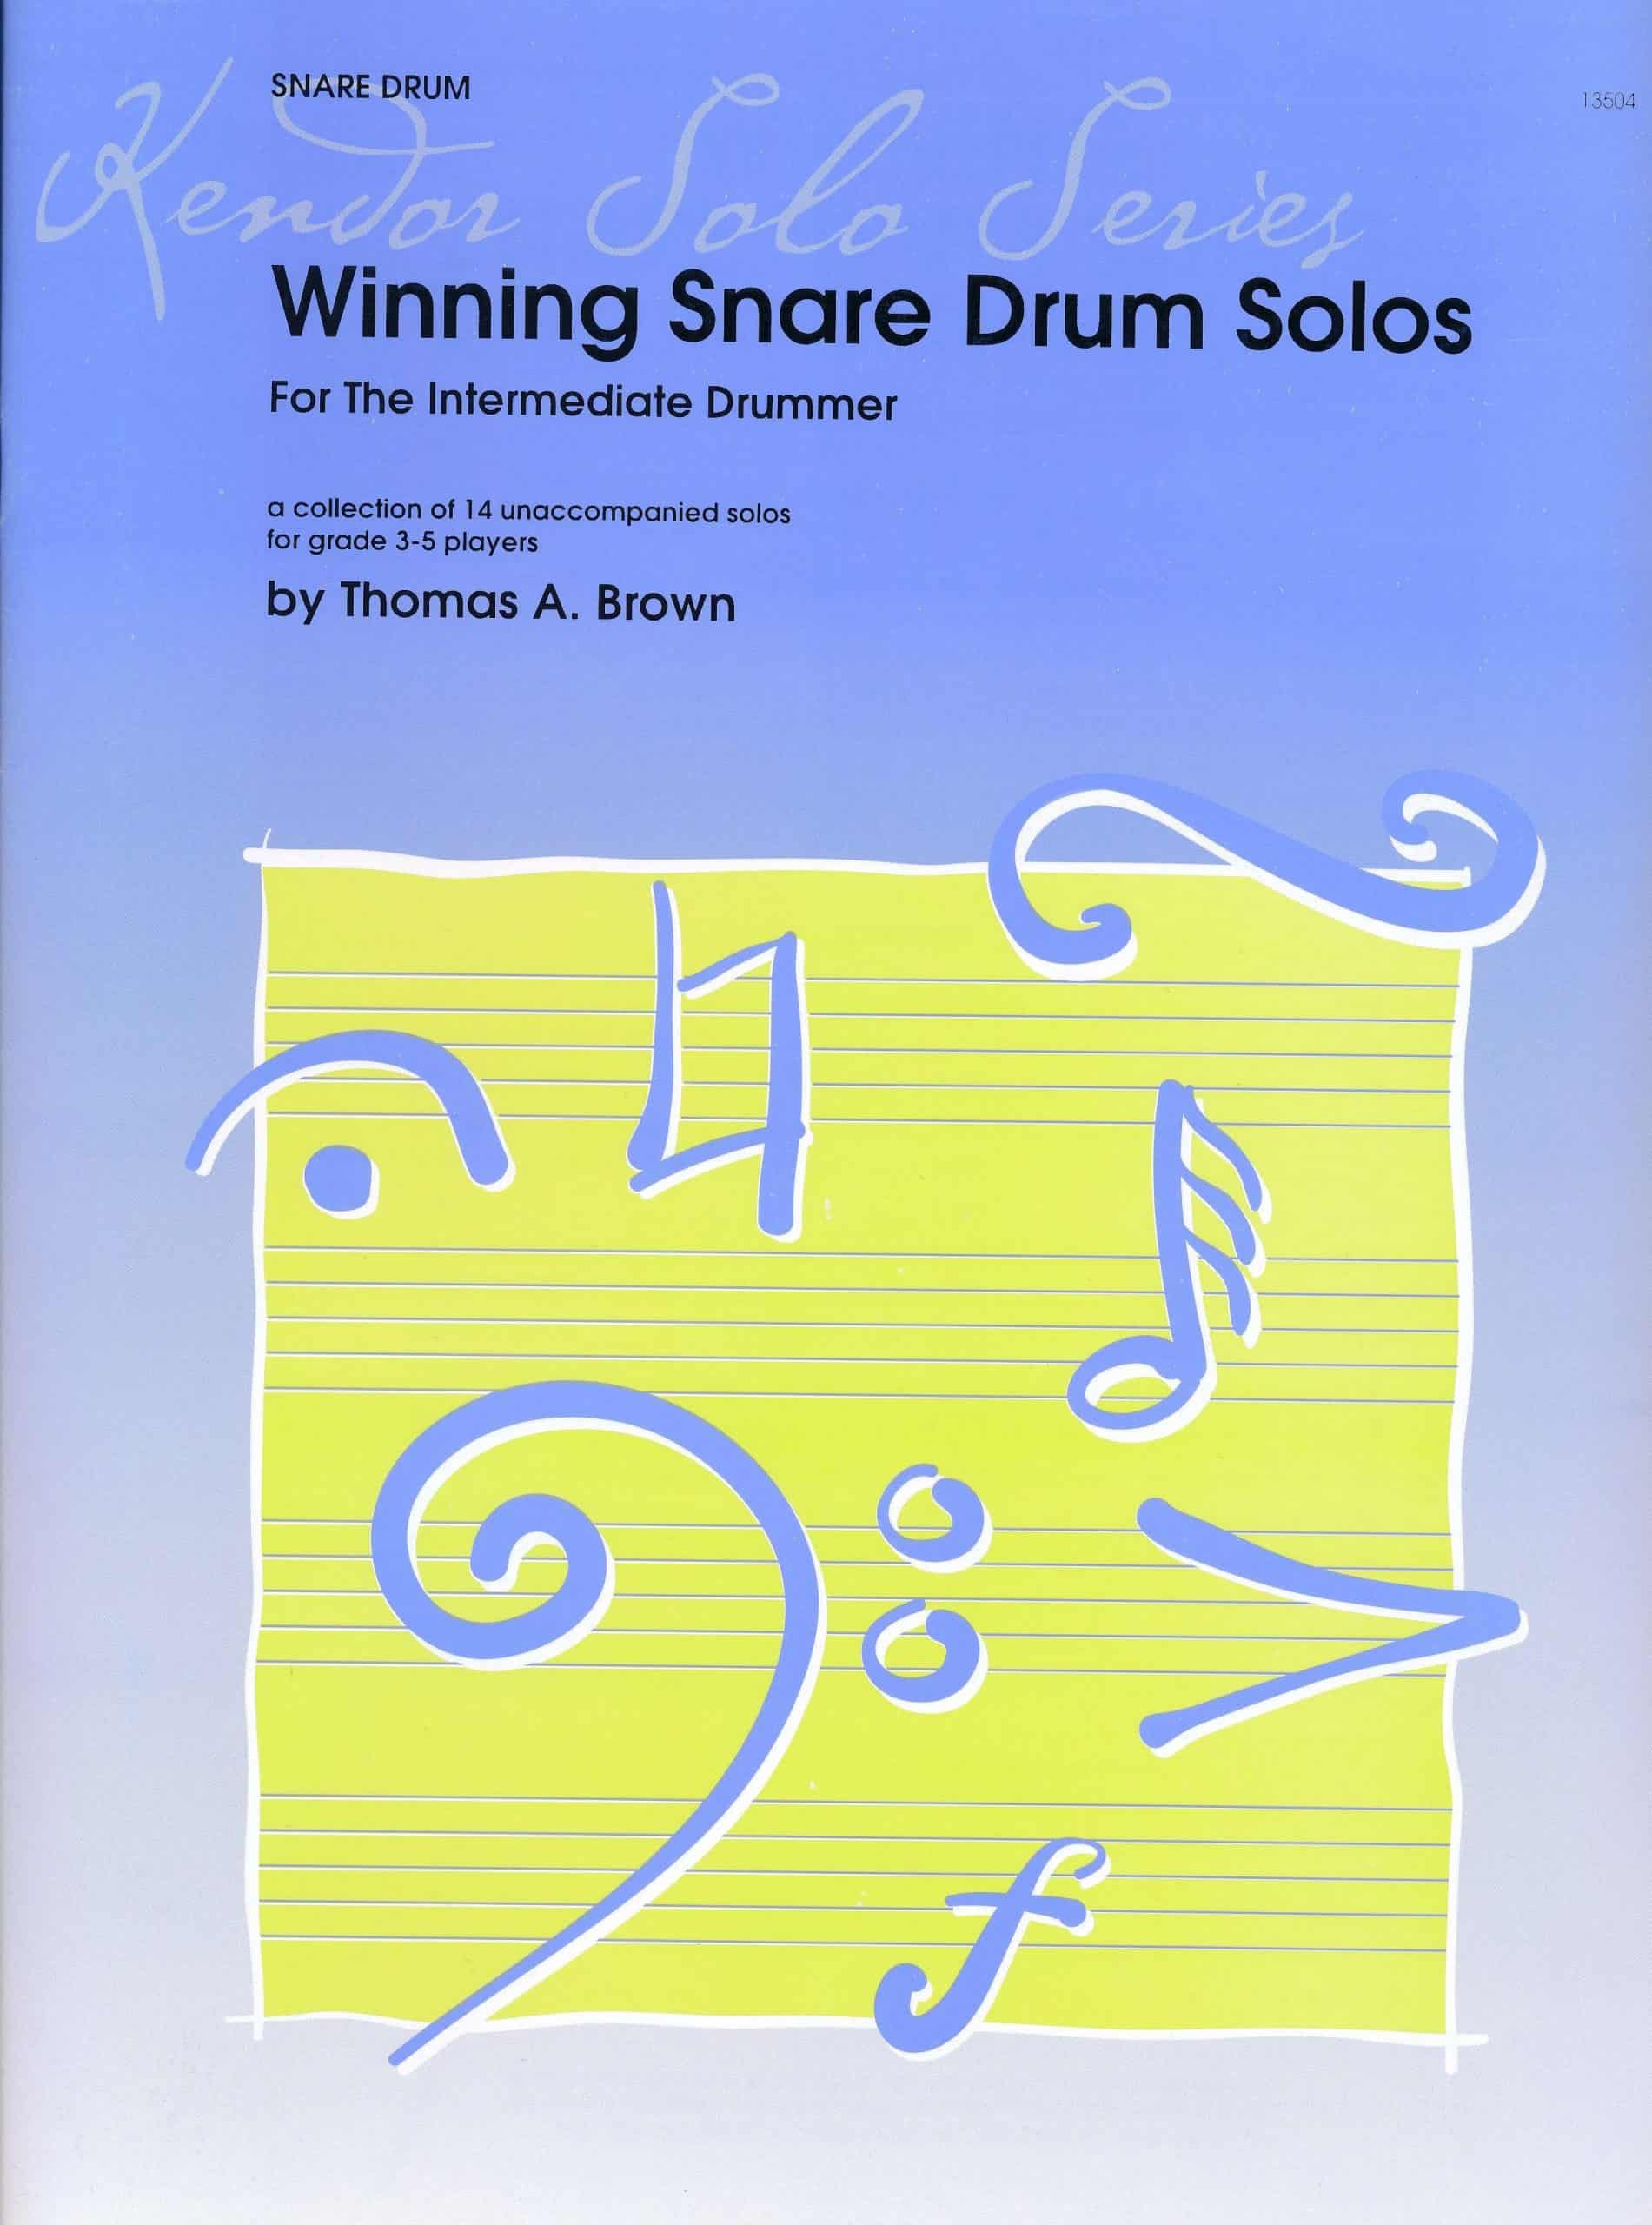 Winning Snare Drum Solos For The Intermediate Drummer